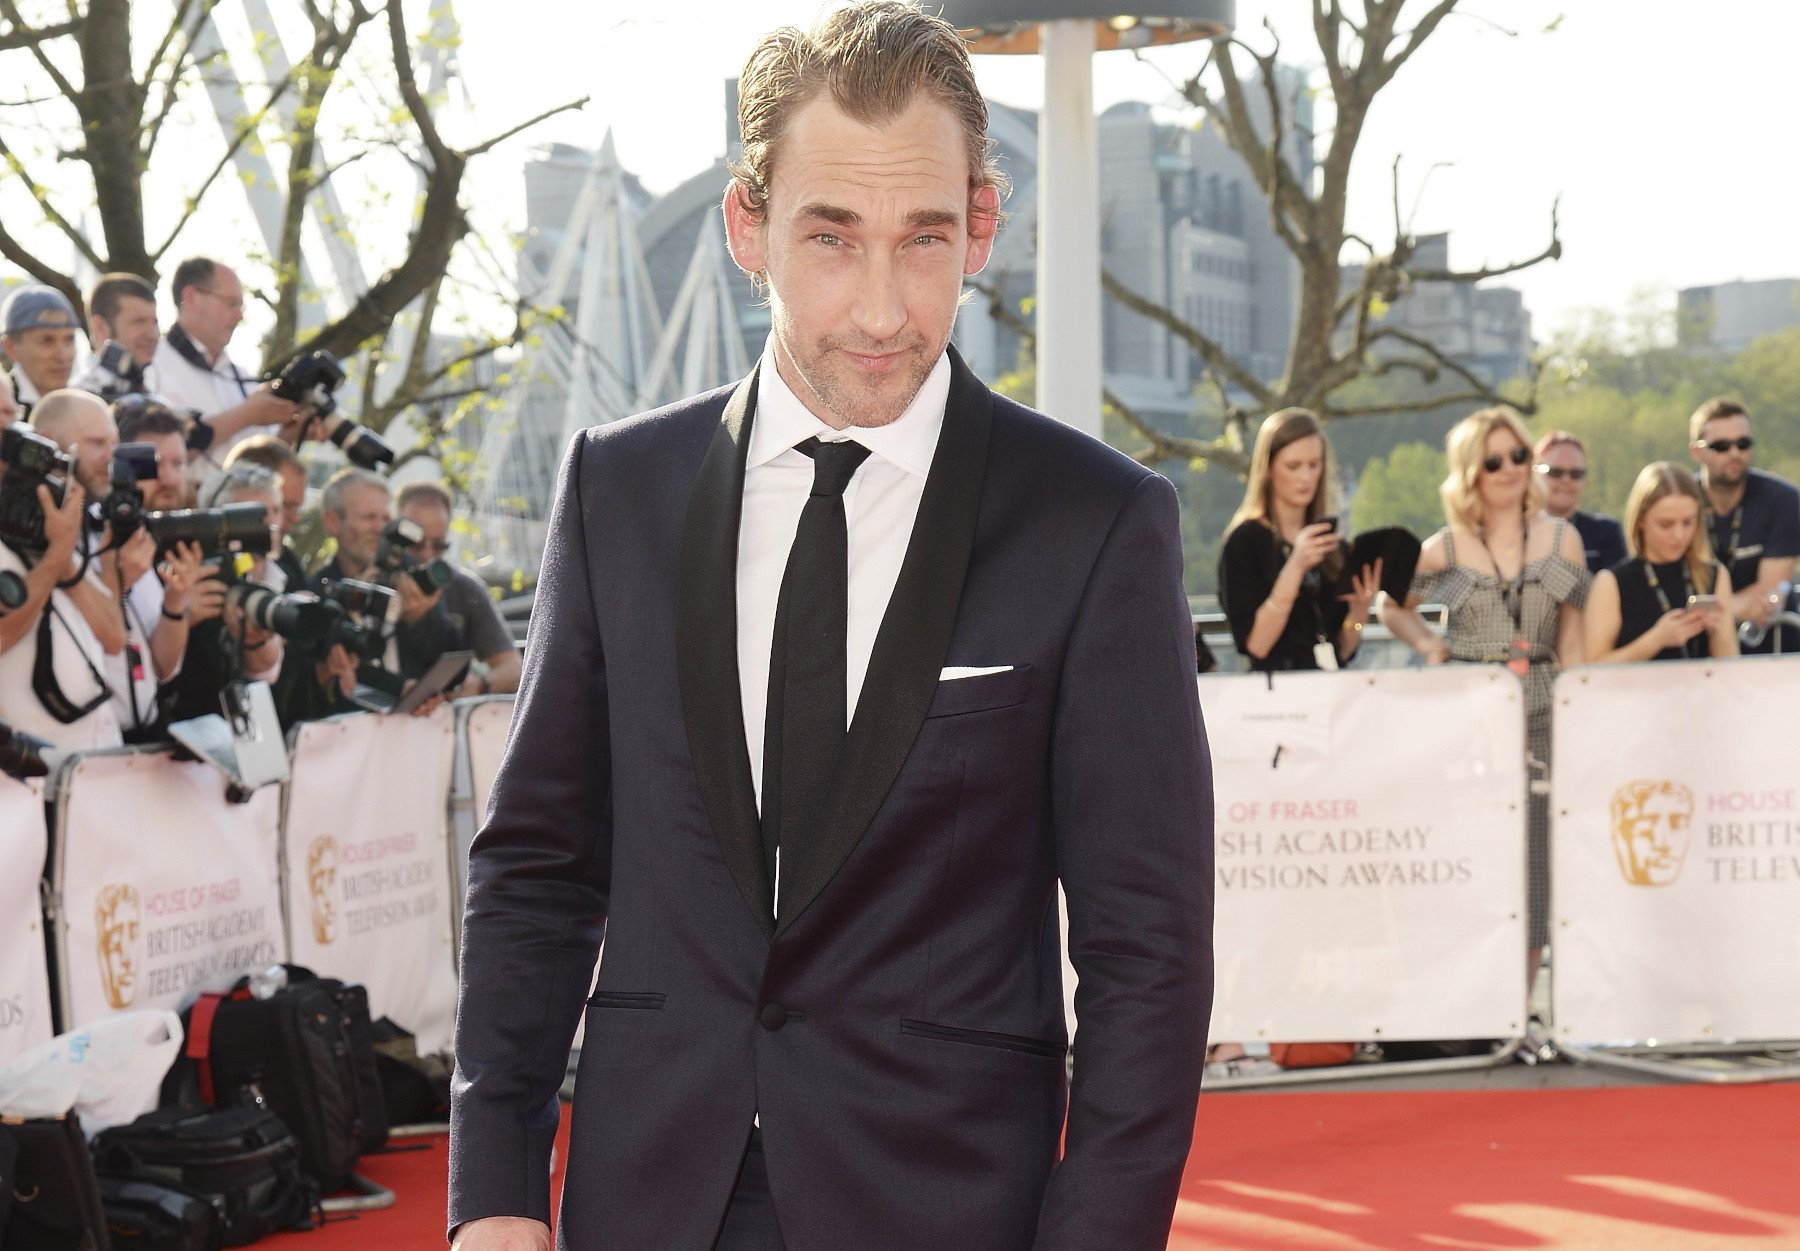 Actor Joseph Mawle, who plays Adar in 'The Lord of the Rings: The Rings of Power.' He's wearing a black suit, white shirt, and black tie and smiling.